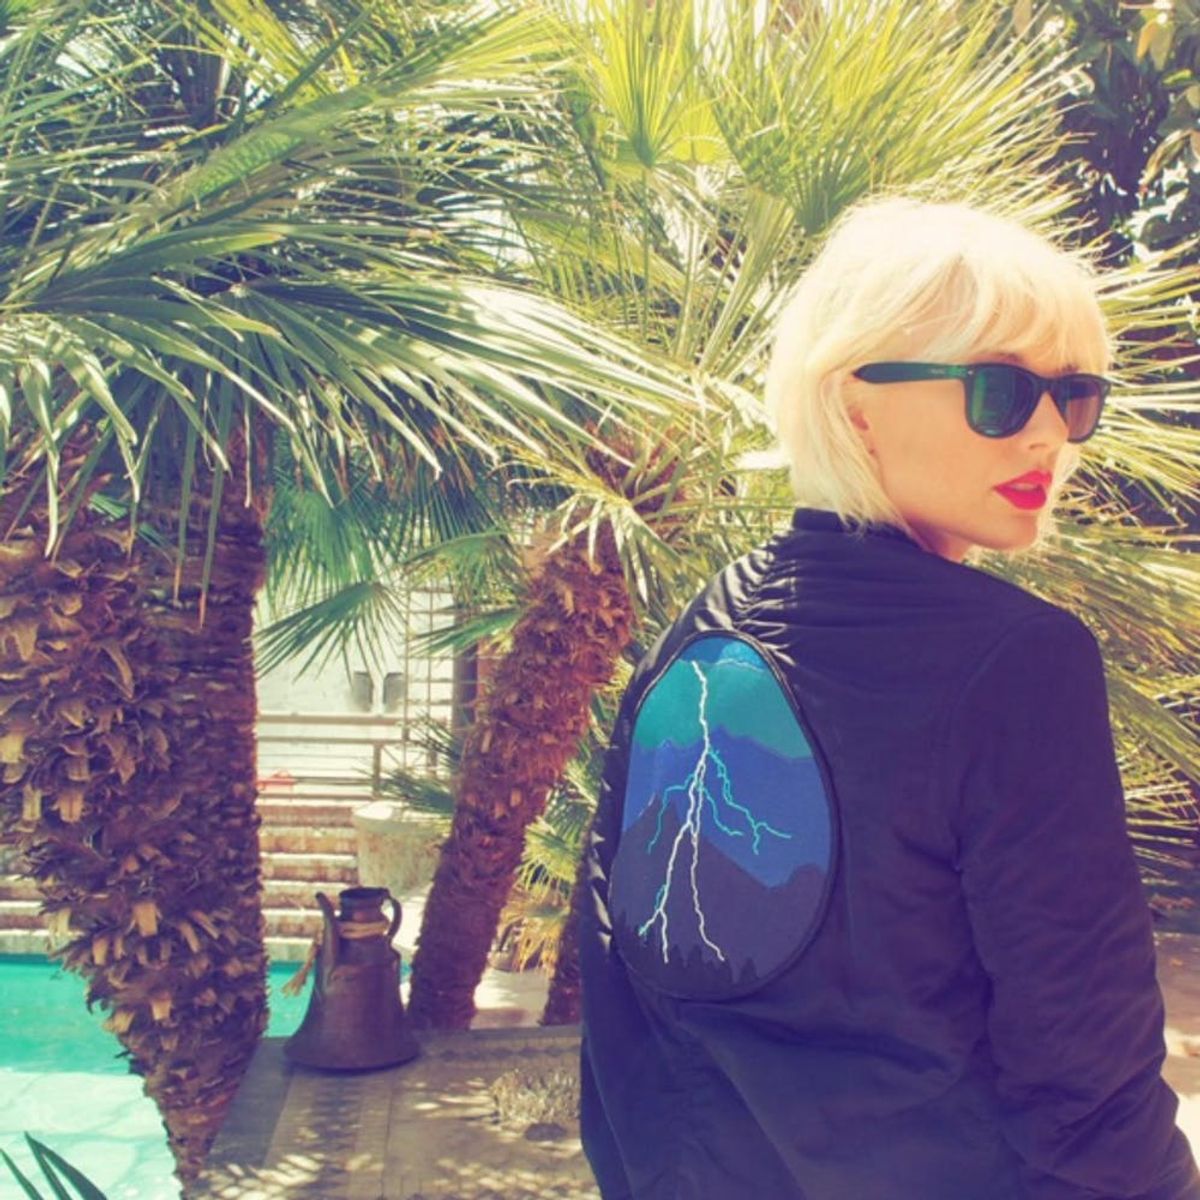 We Now Know the Story Behind Taylor Swift’s Mystery Jacket